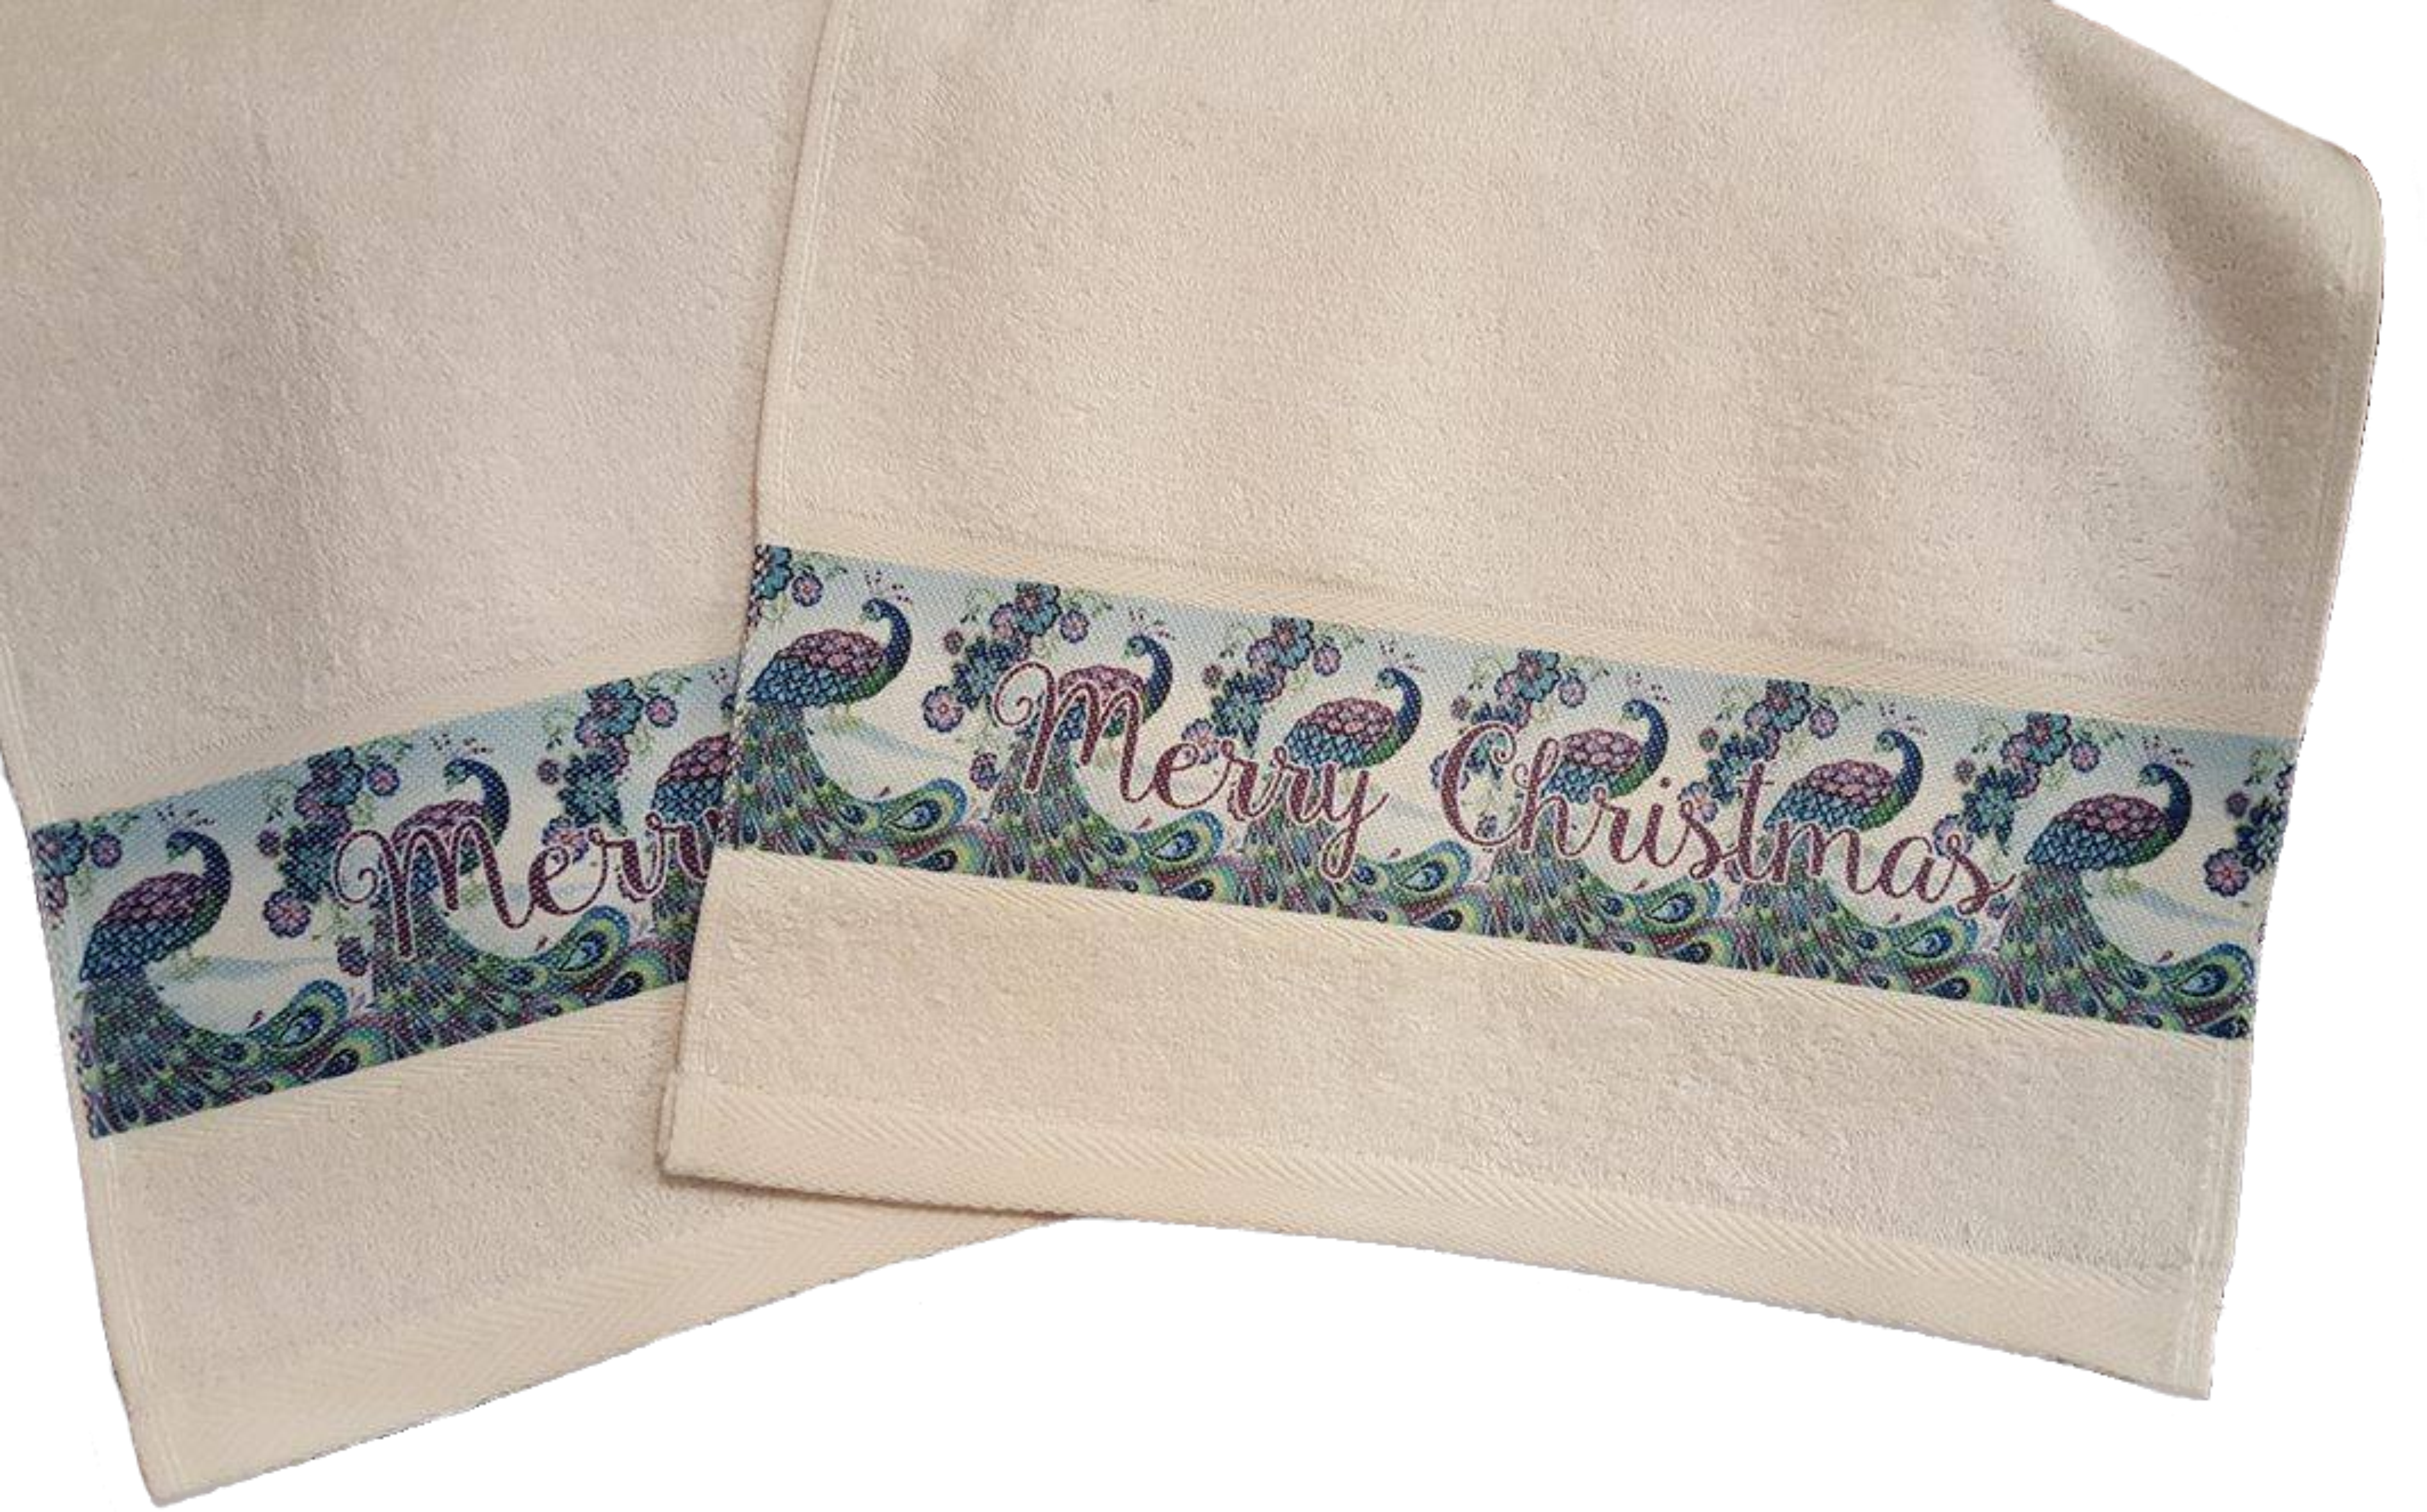 Christmas Peacock Hand Towels made with sublimation printing